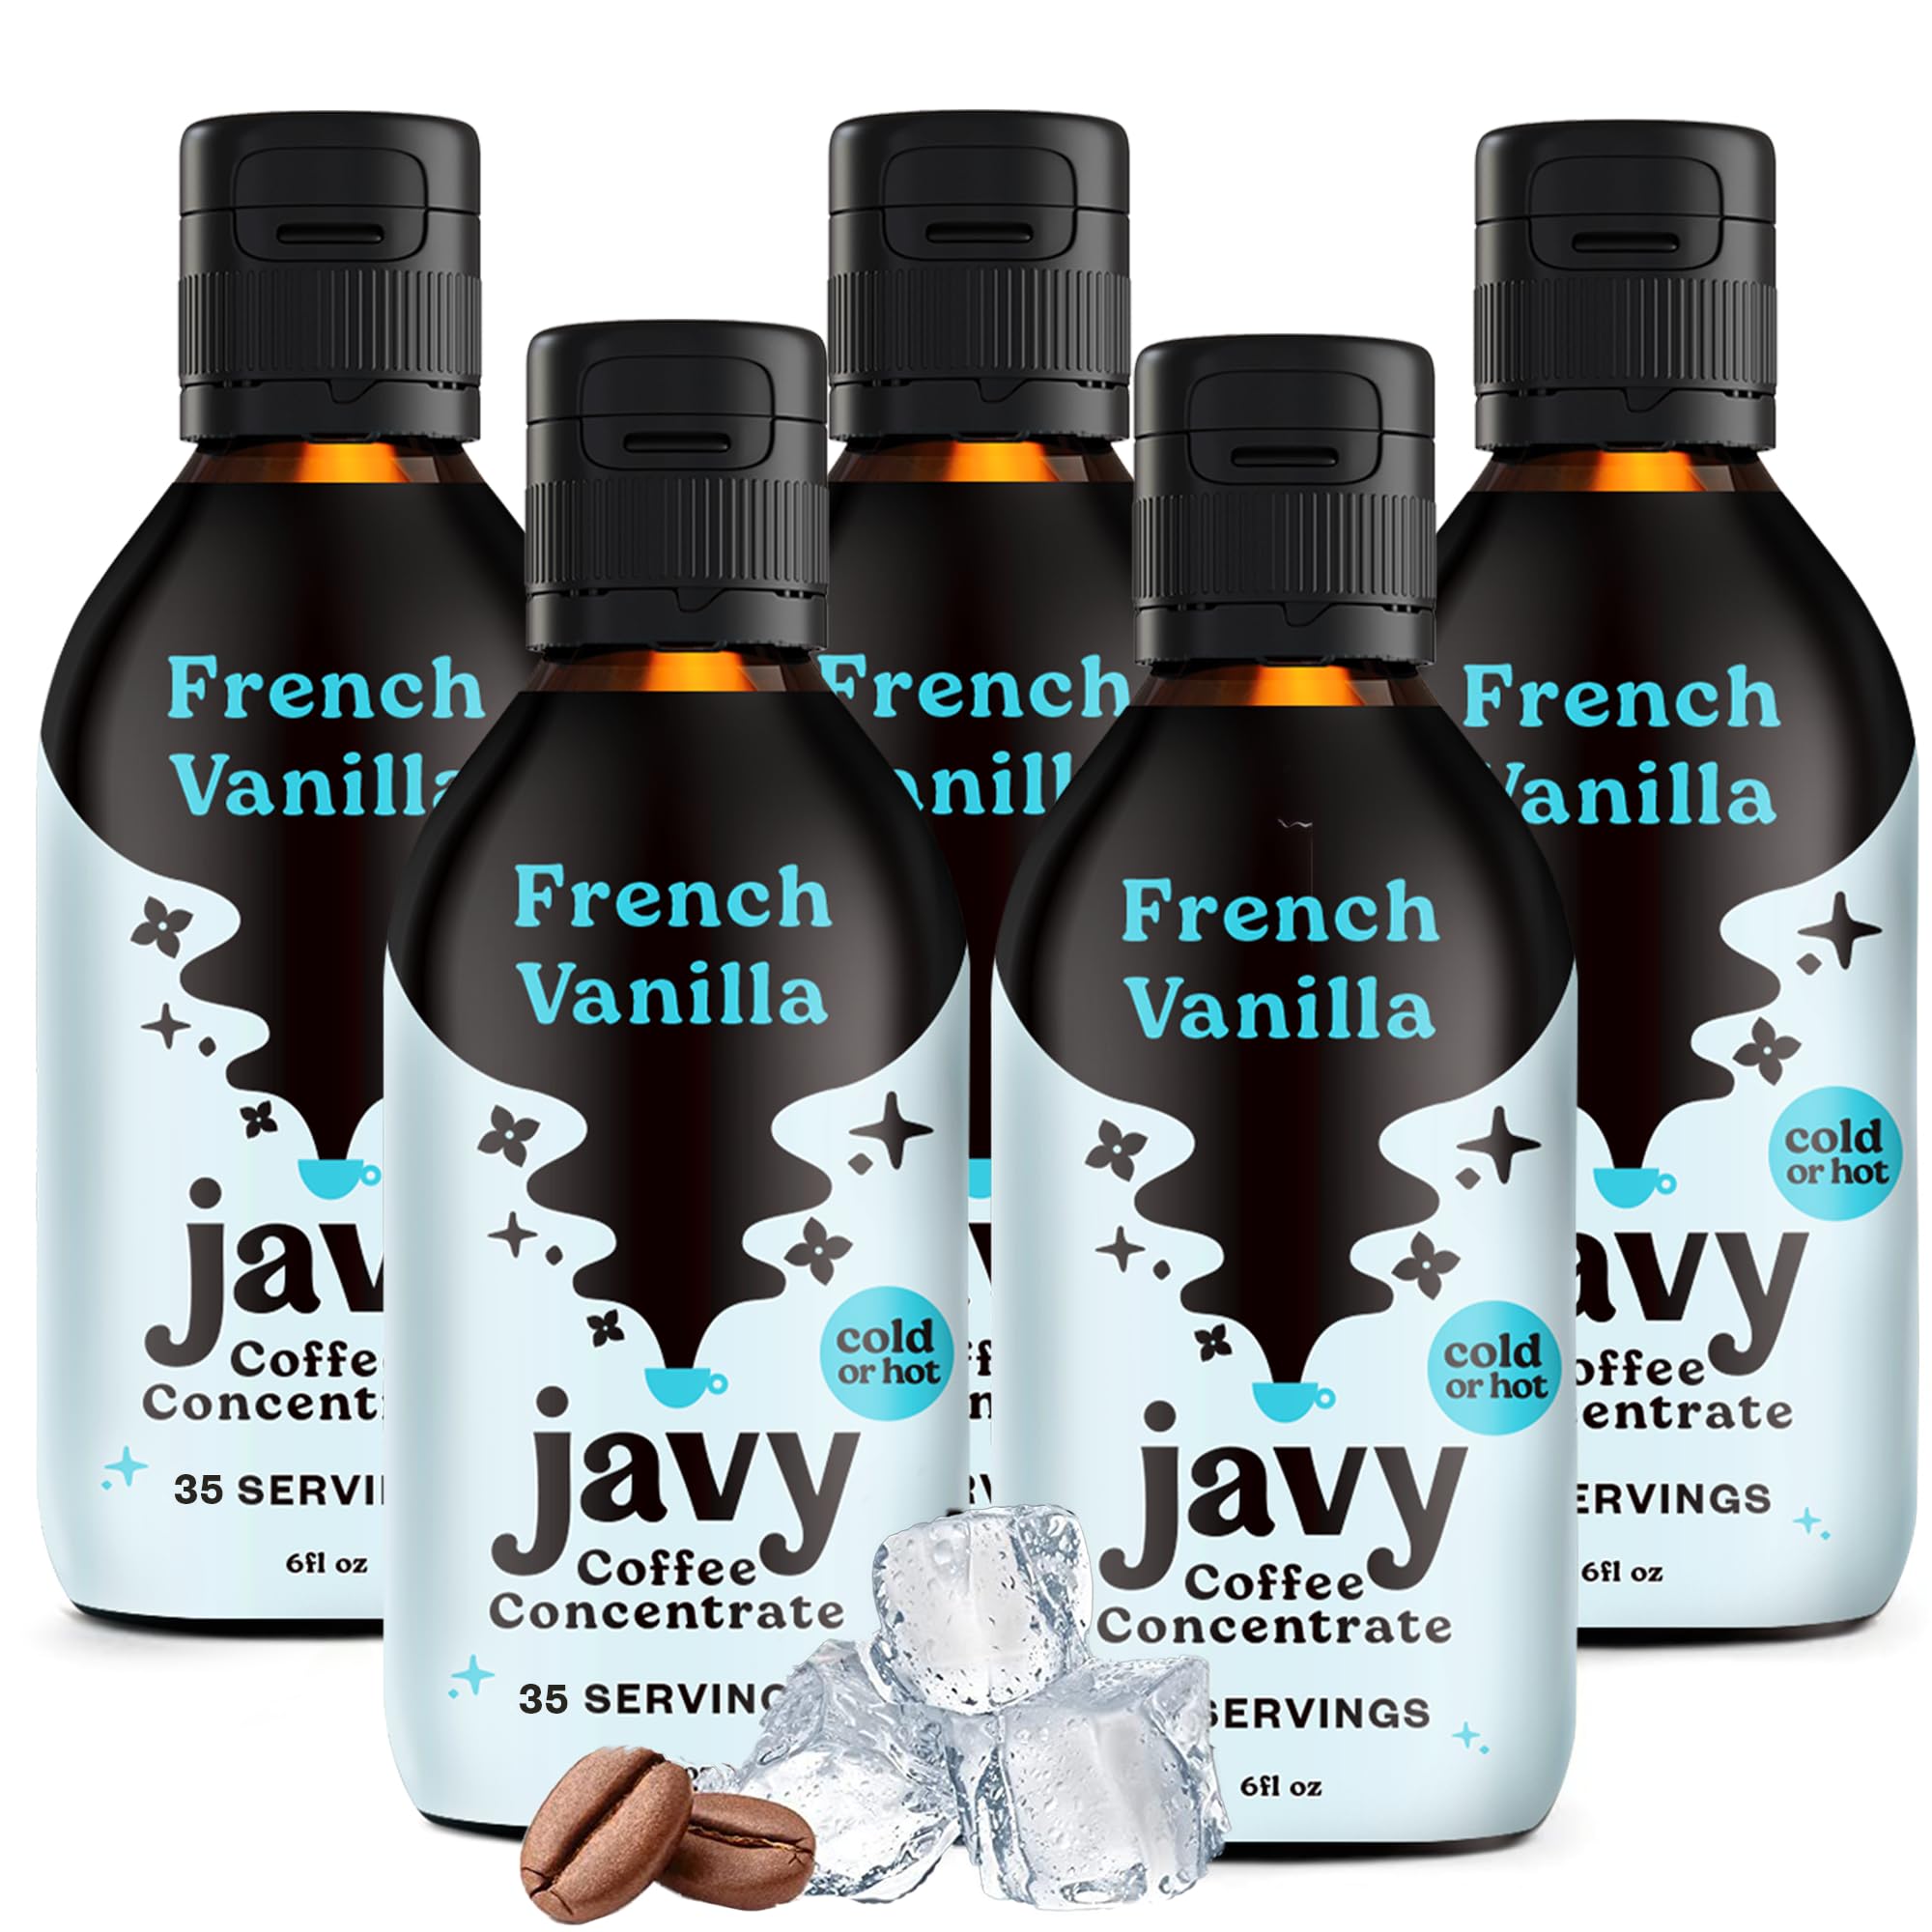 15-facts-about-javy-coffee-concentrate